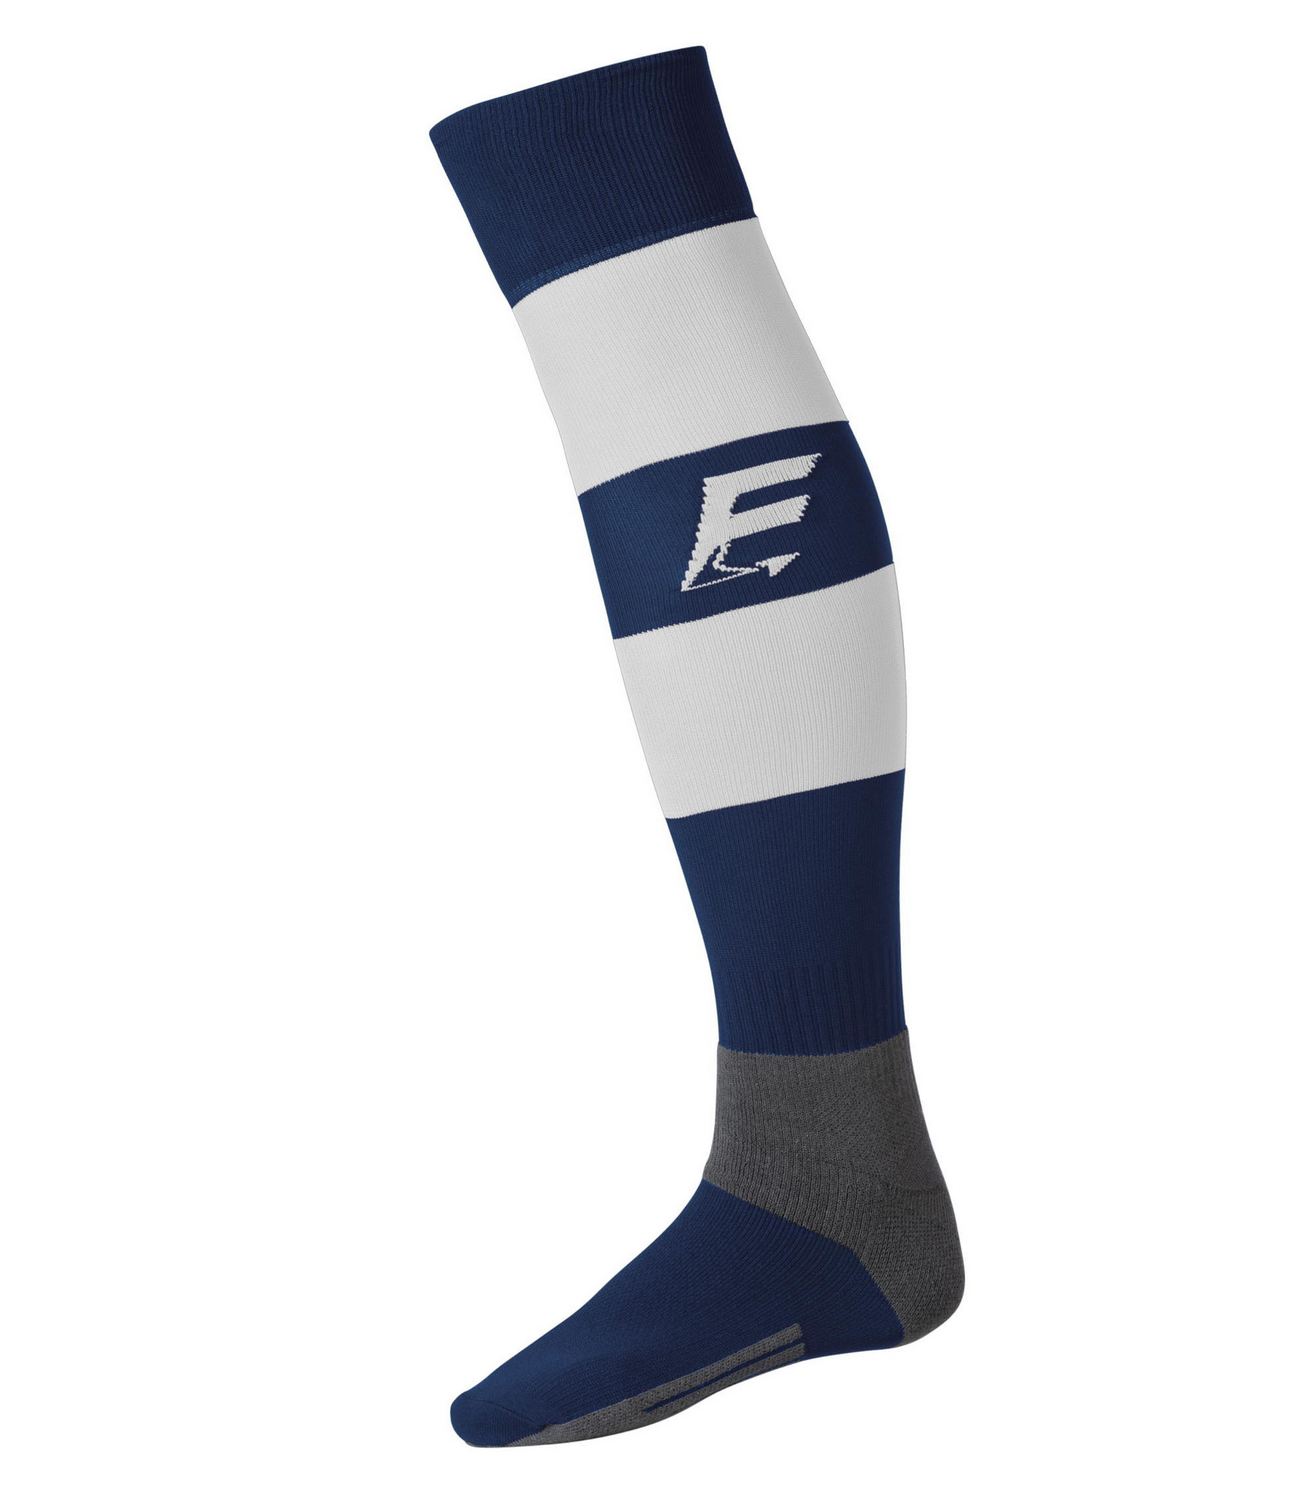 FORCE XV CHAUSSETTES DE RUGBY RAYEES Marine-Blanc